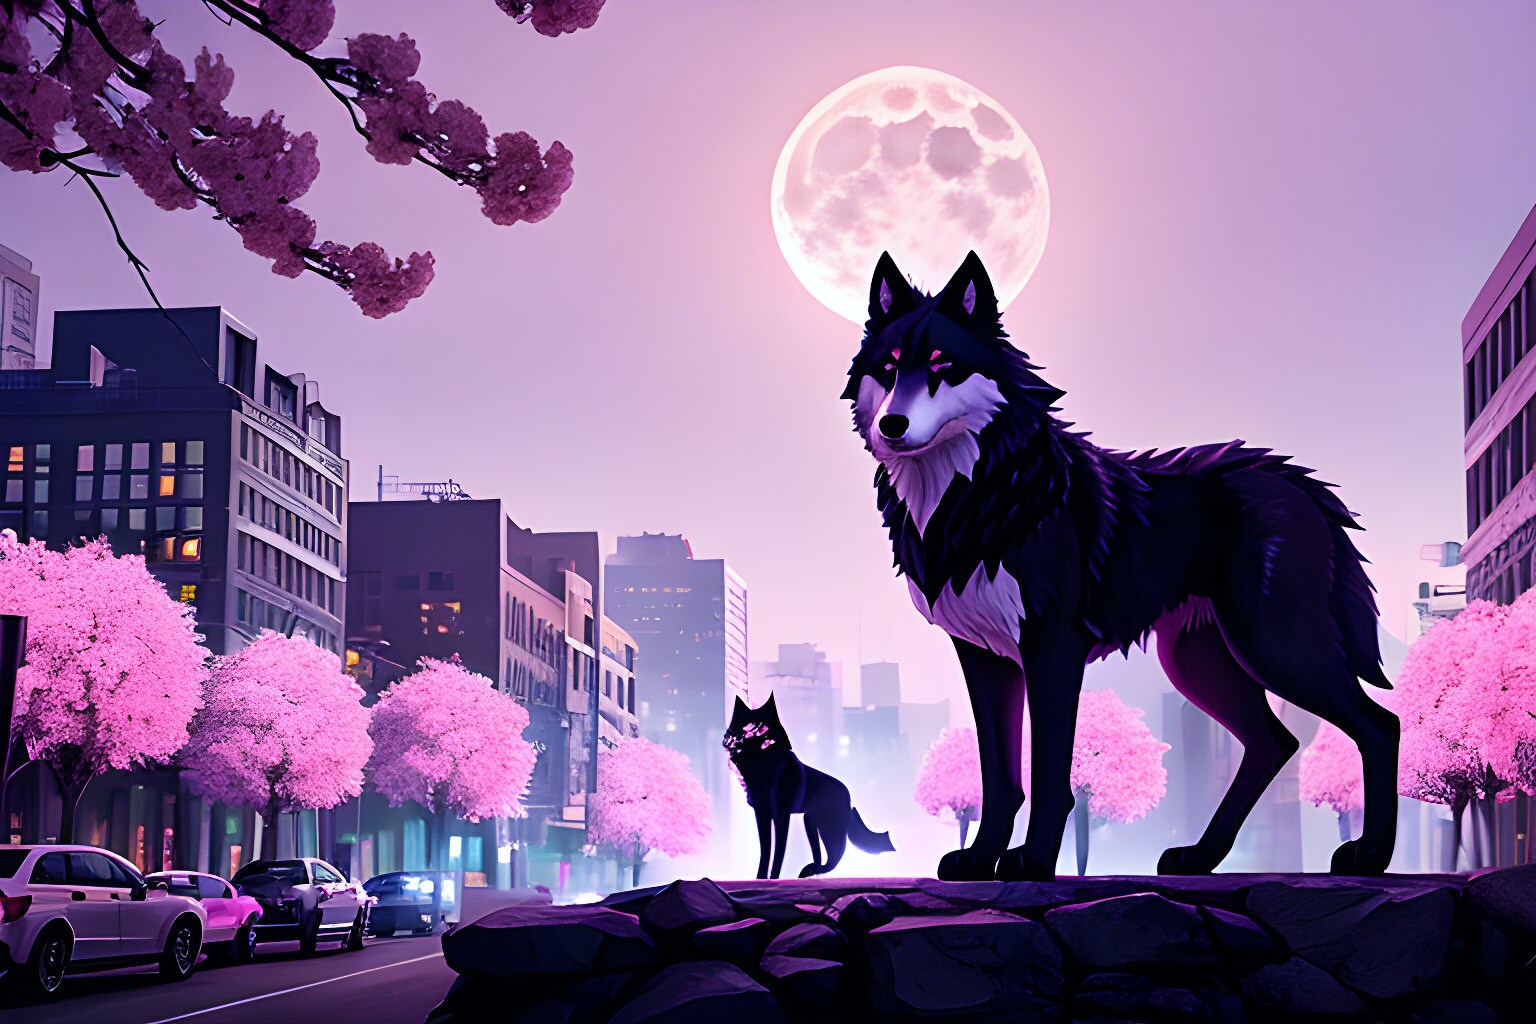 Two wolves in a fantasy art street scene at night, one back and looking the other way, luminous moon hangs in the sky above.